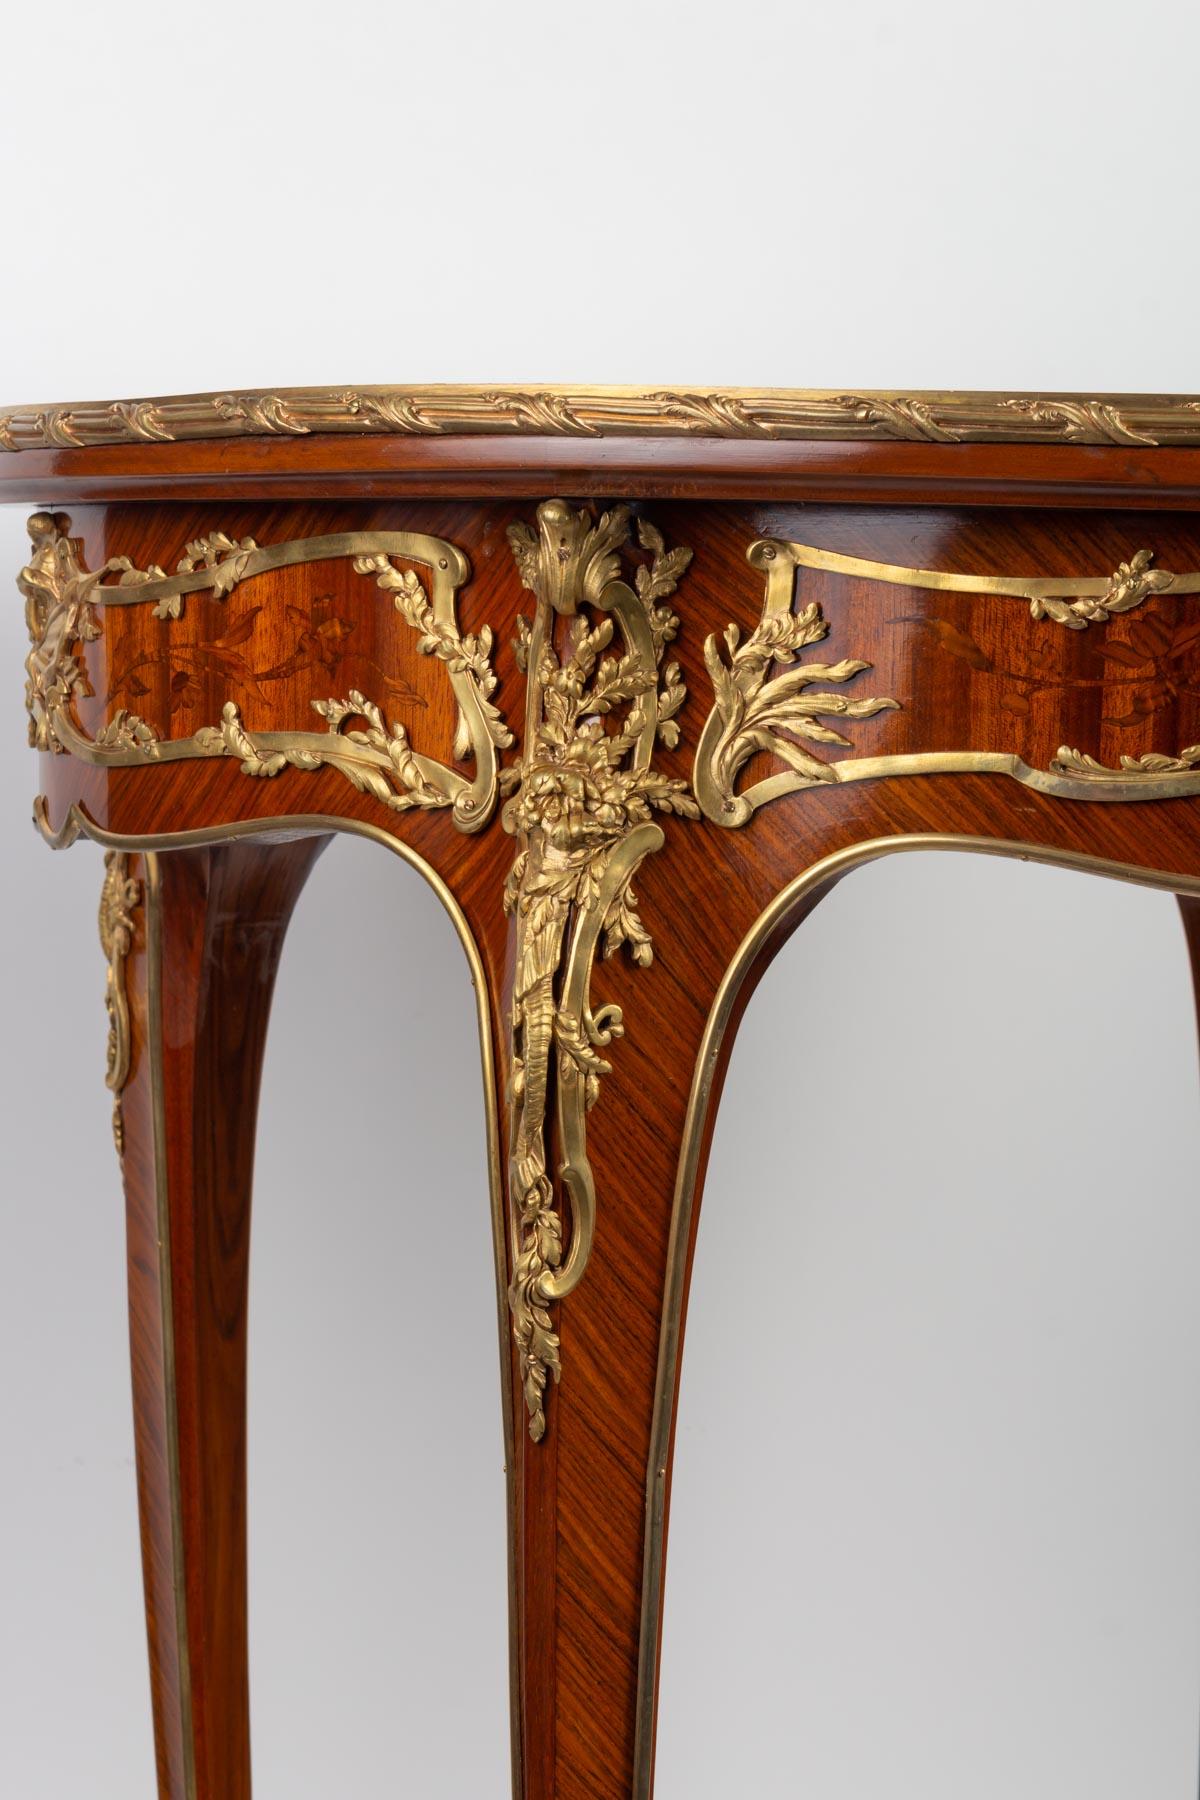 Napoleon III Pedestal Table in Marquetry and Gilt Bronze